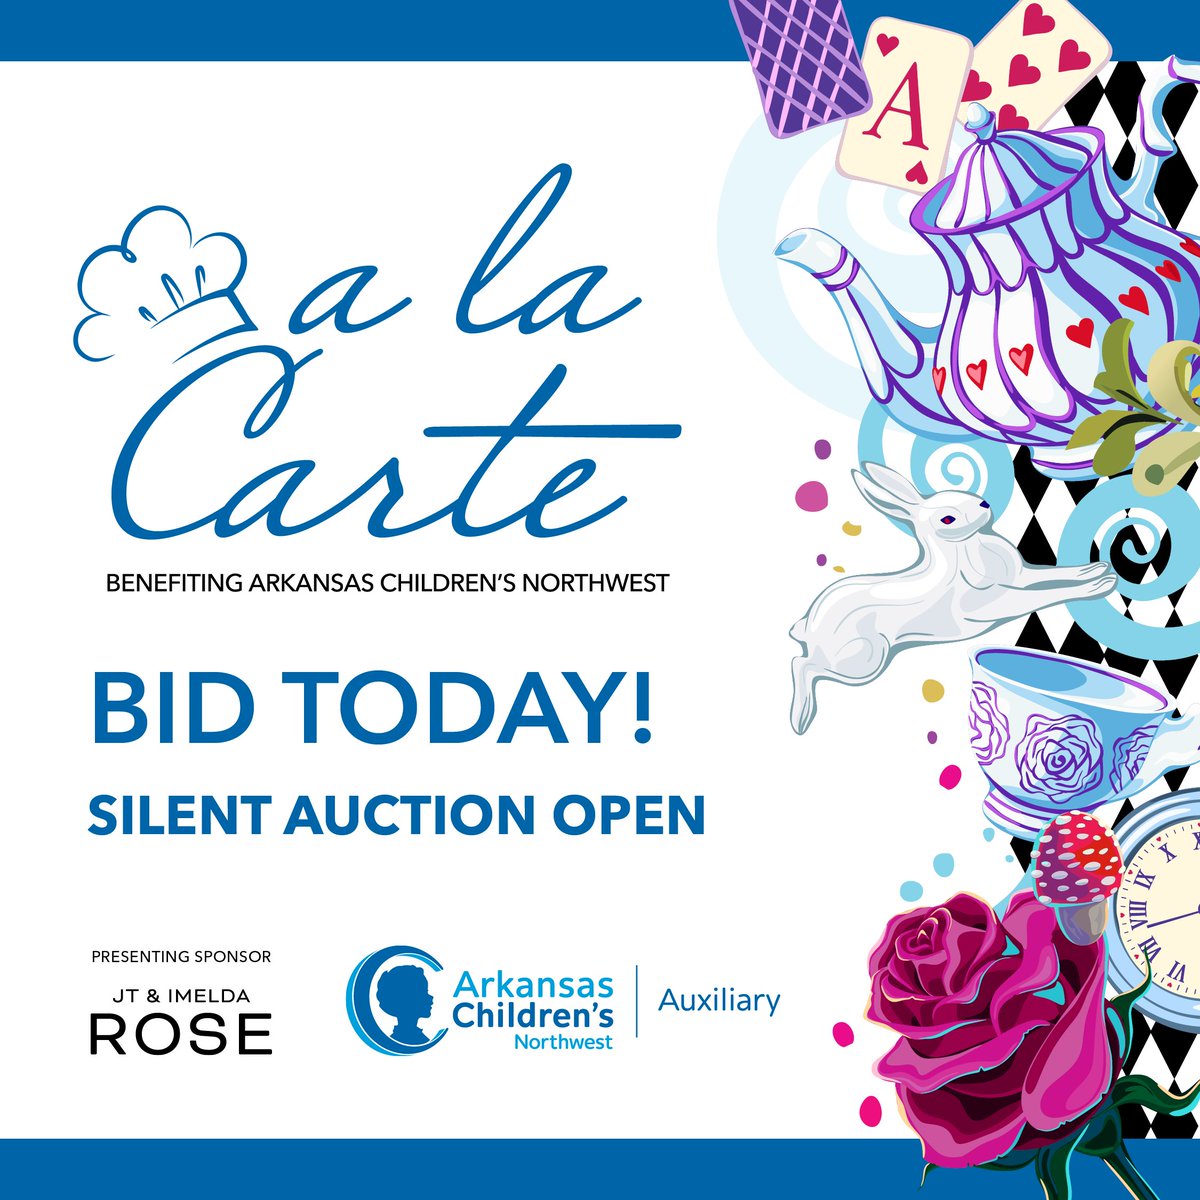 The premier silent auction for Arkansas Children’s Northwest a la Carte opens today! To purchase tickets and register for the online auction, visit ACNWalaCarte.com. While you’re there, make sure to get your tickets today to enjoy this fabulous tasting event. 🎟️✨